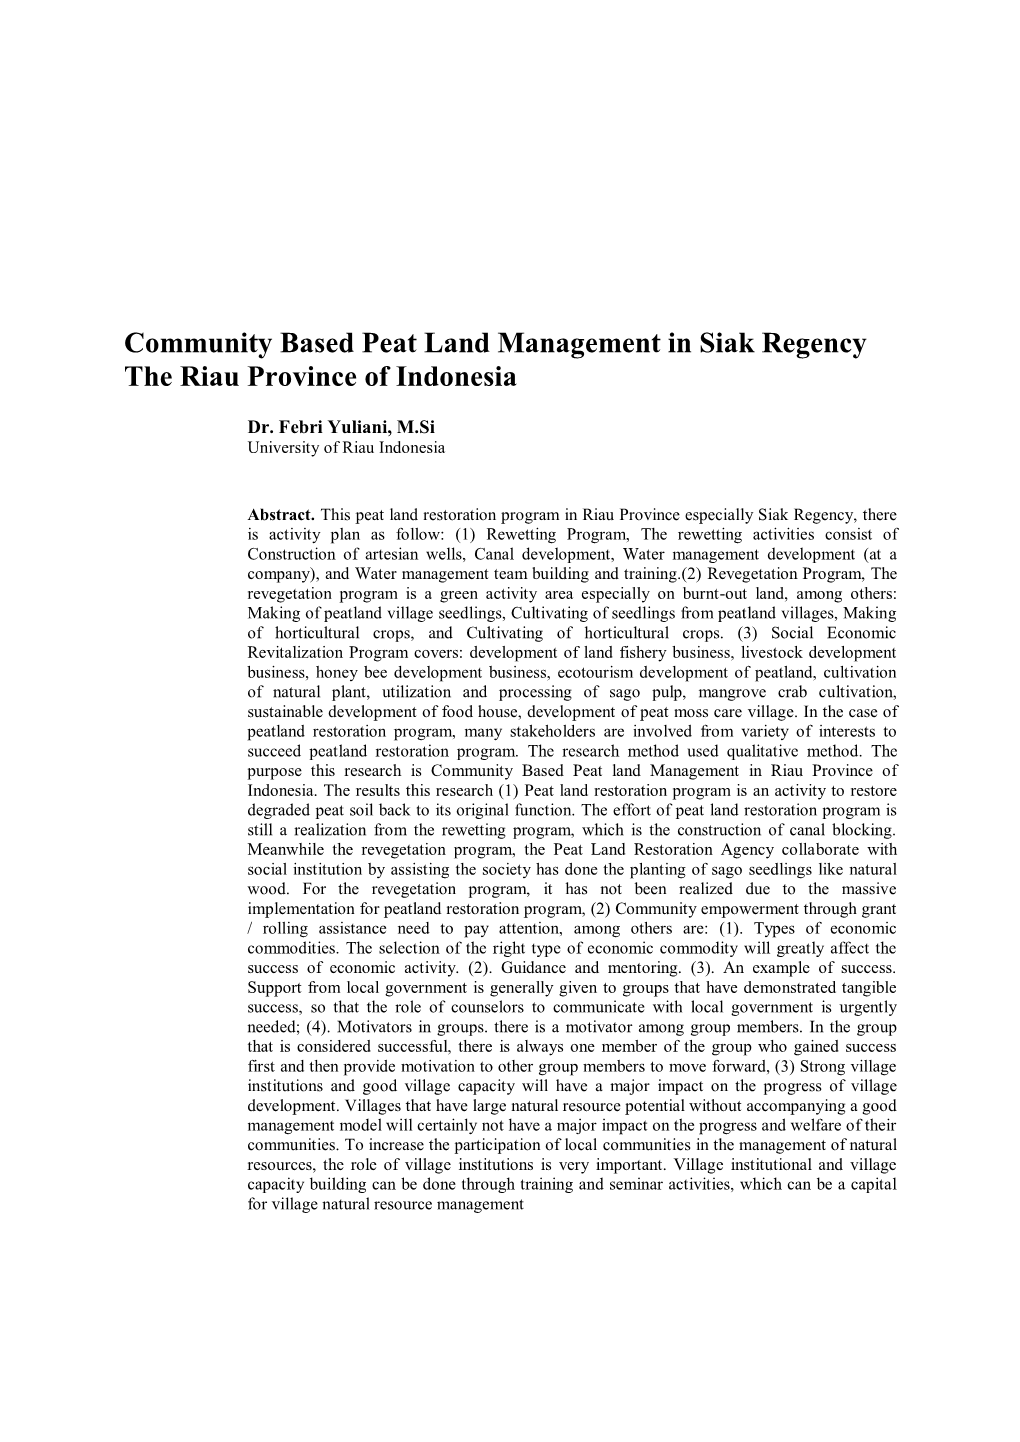 Community Based Peat Land Management in Siak Regency the Riau Province of Indonesia